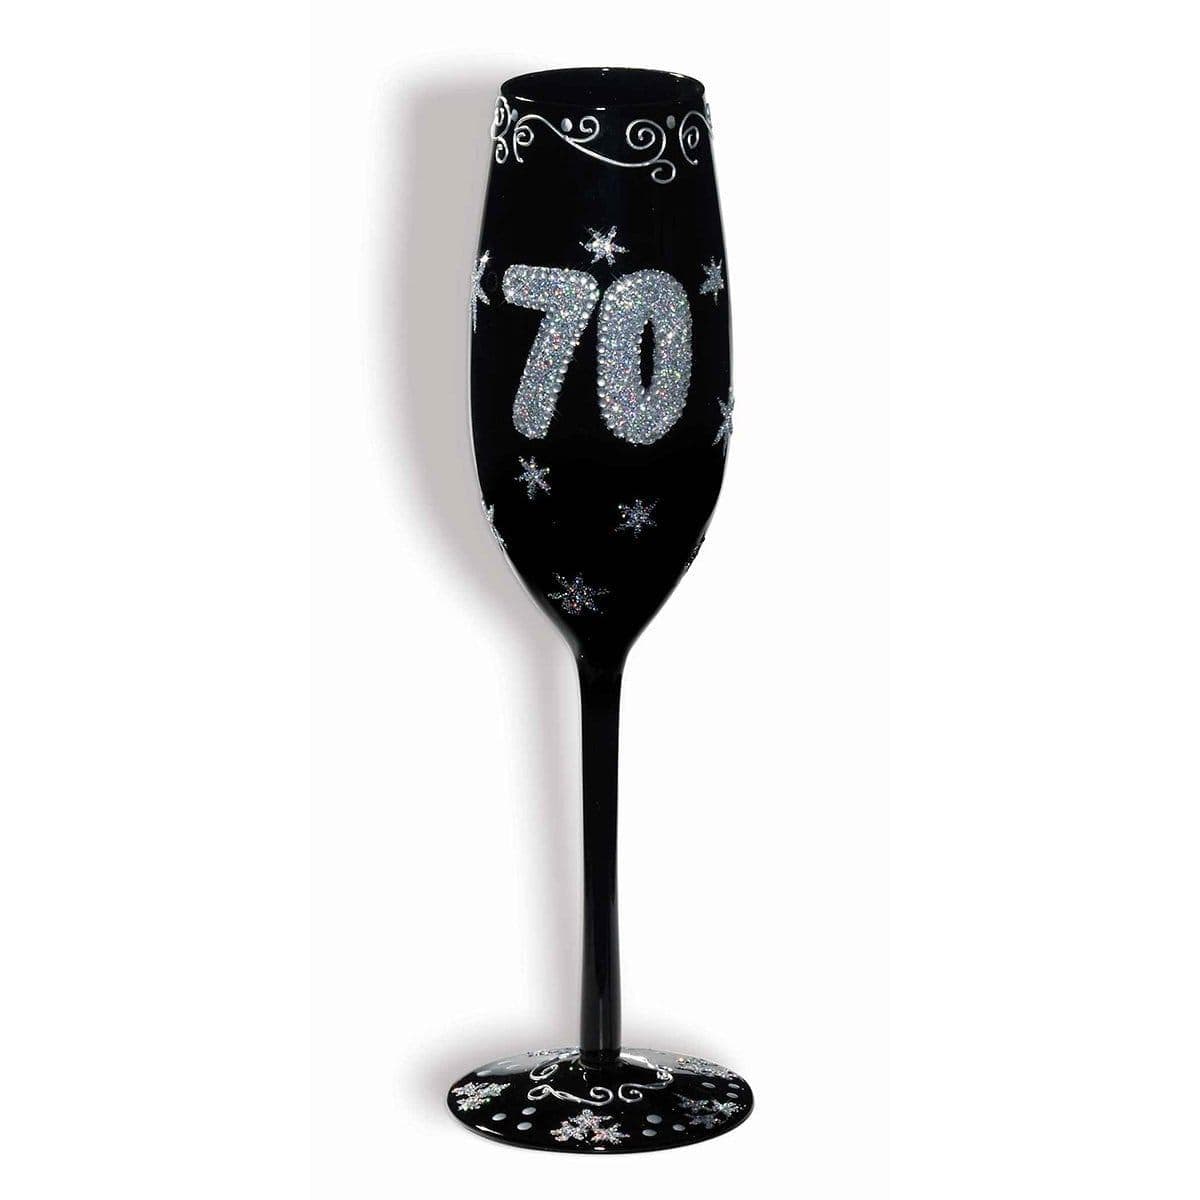 Buy Age Specific Birthday Champagne Flute - 70th Birthday sold at Party Expert